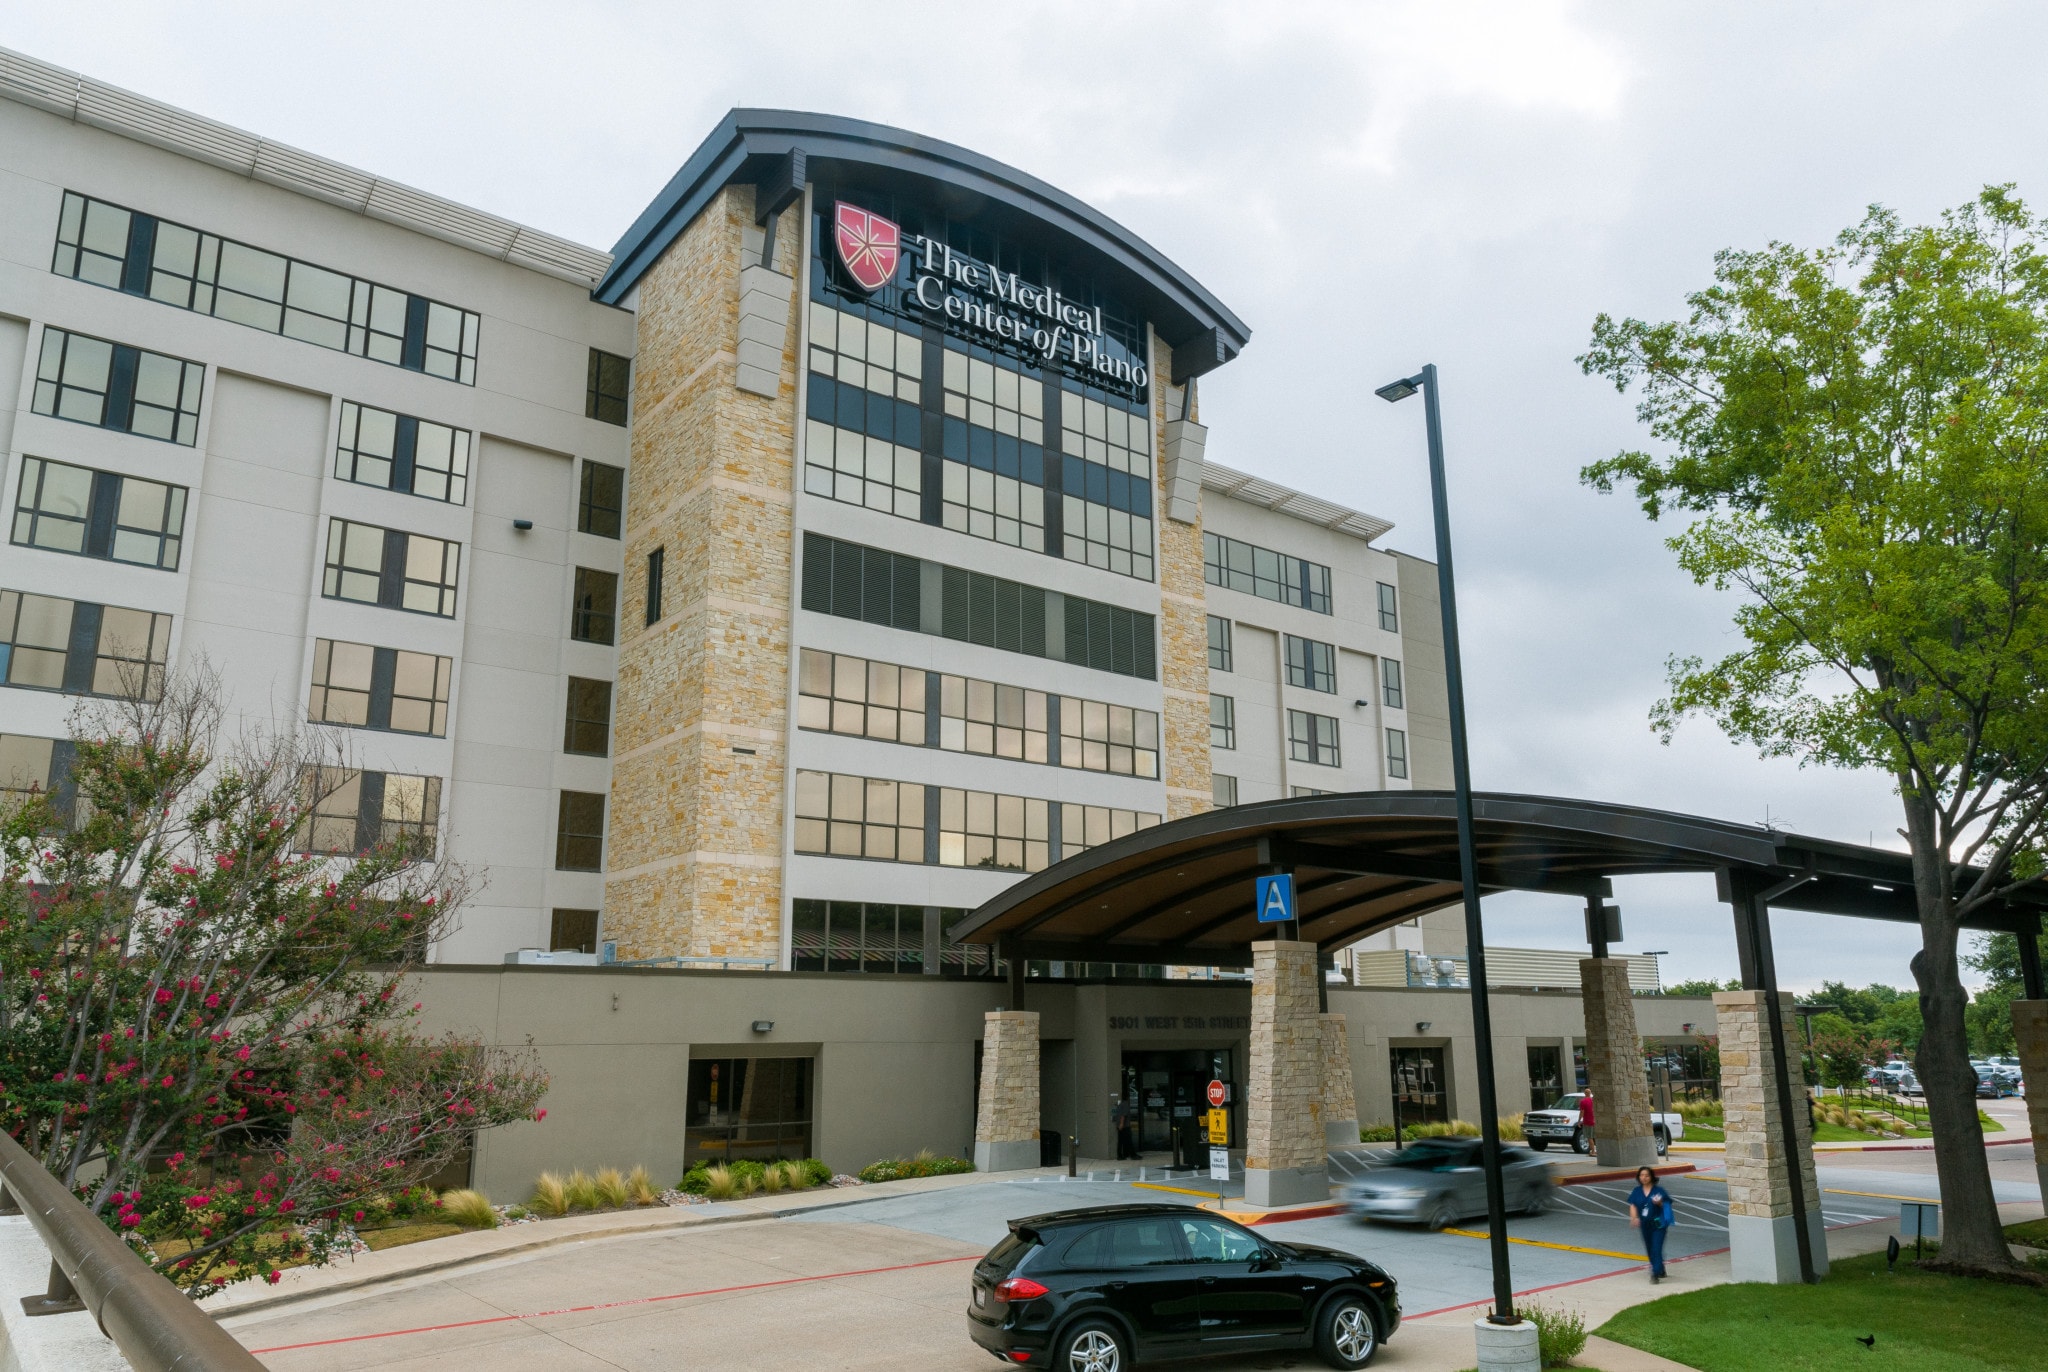 The medical center of Plano – Quality gynecologic oncology treatments